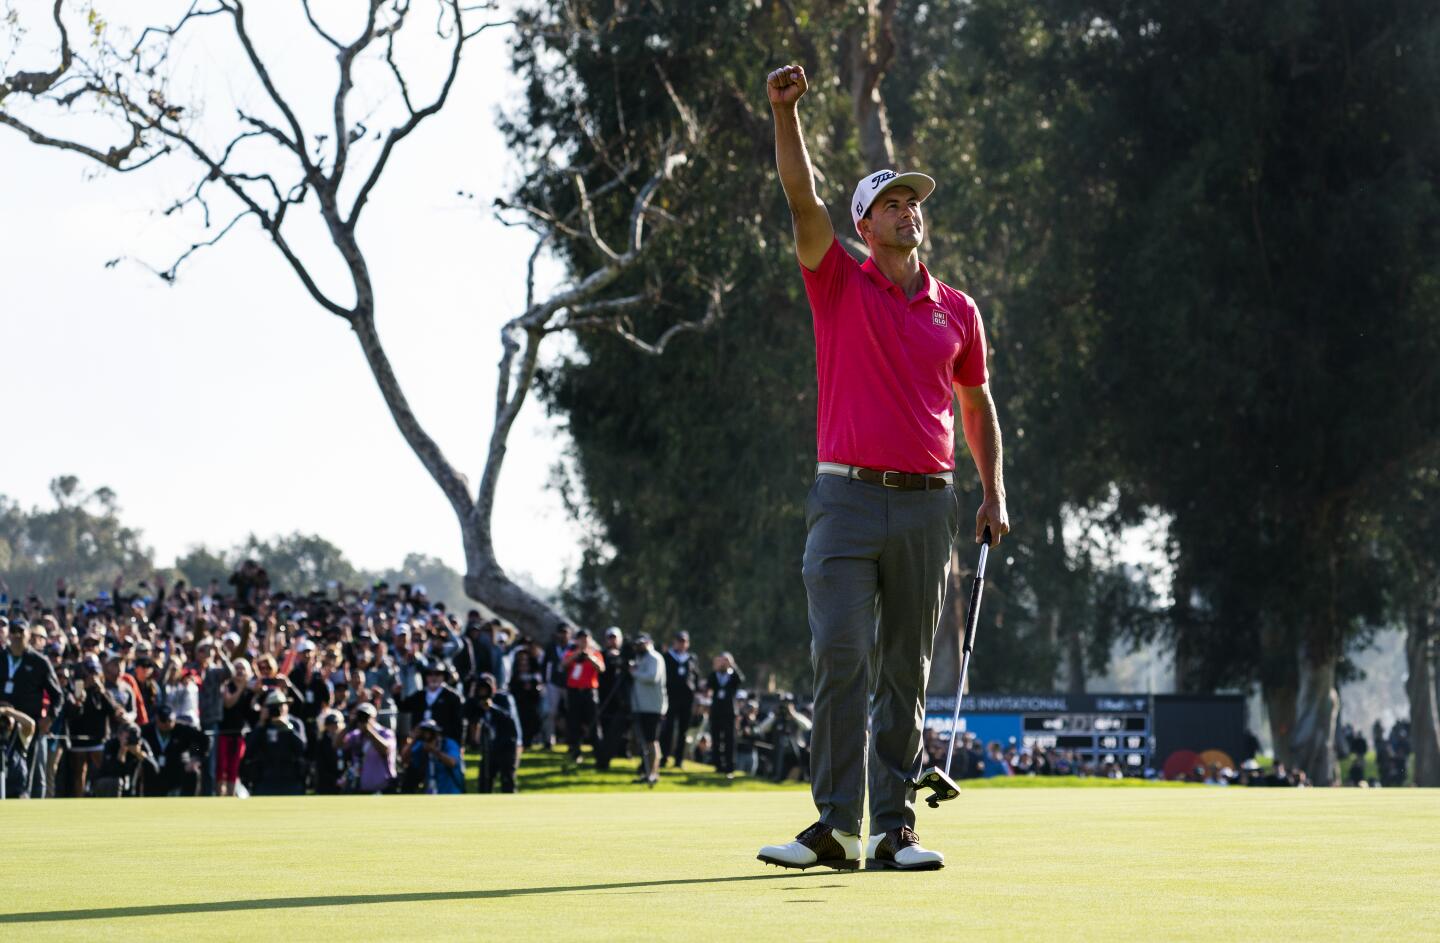 Adam Scott celebrates after winning the Genesis Invitational at Riviera Country Club in Pacific Palisades on Feb. 16, 2020.